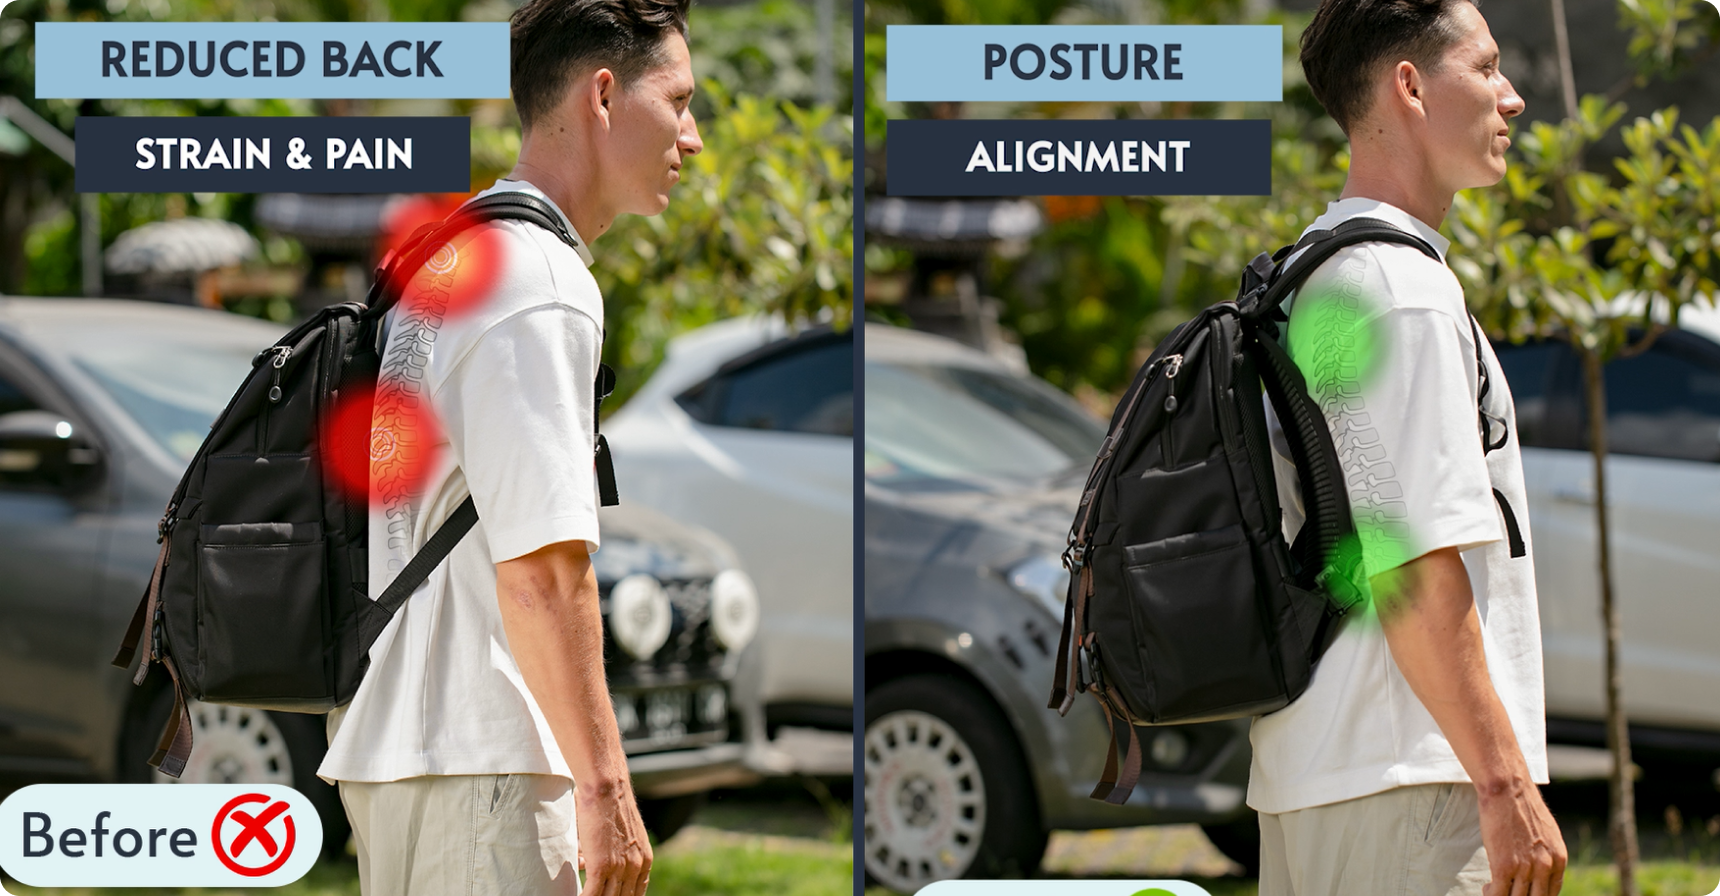 Image depicting the the posture benefits of using the Ventapak backpack spacer mesh